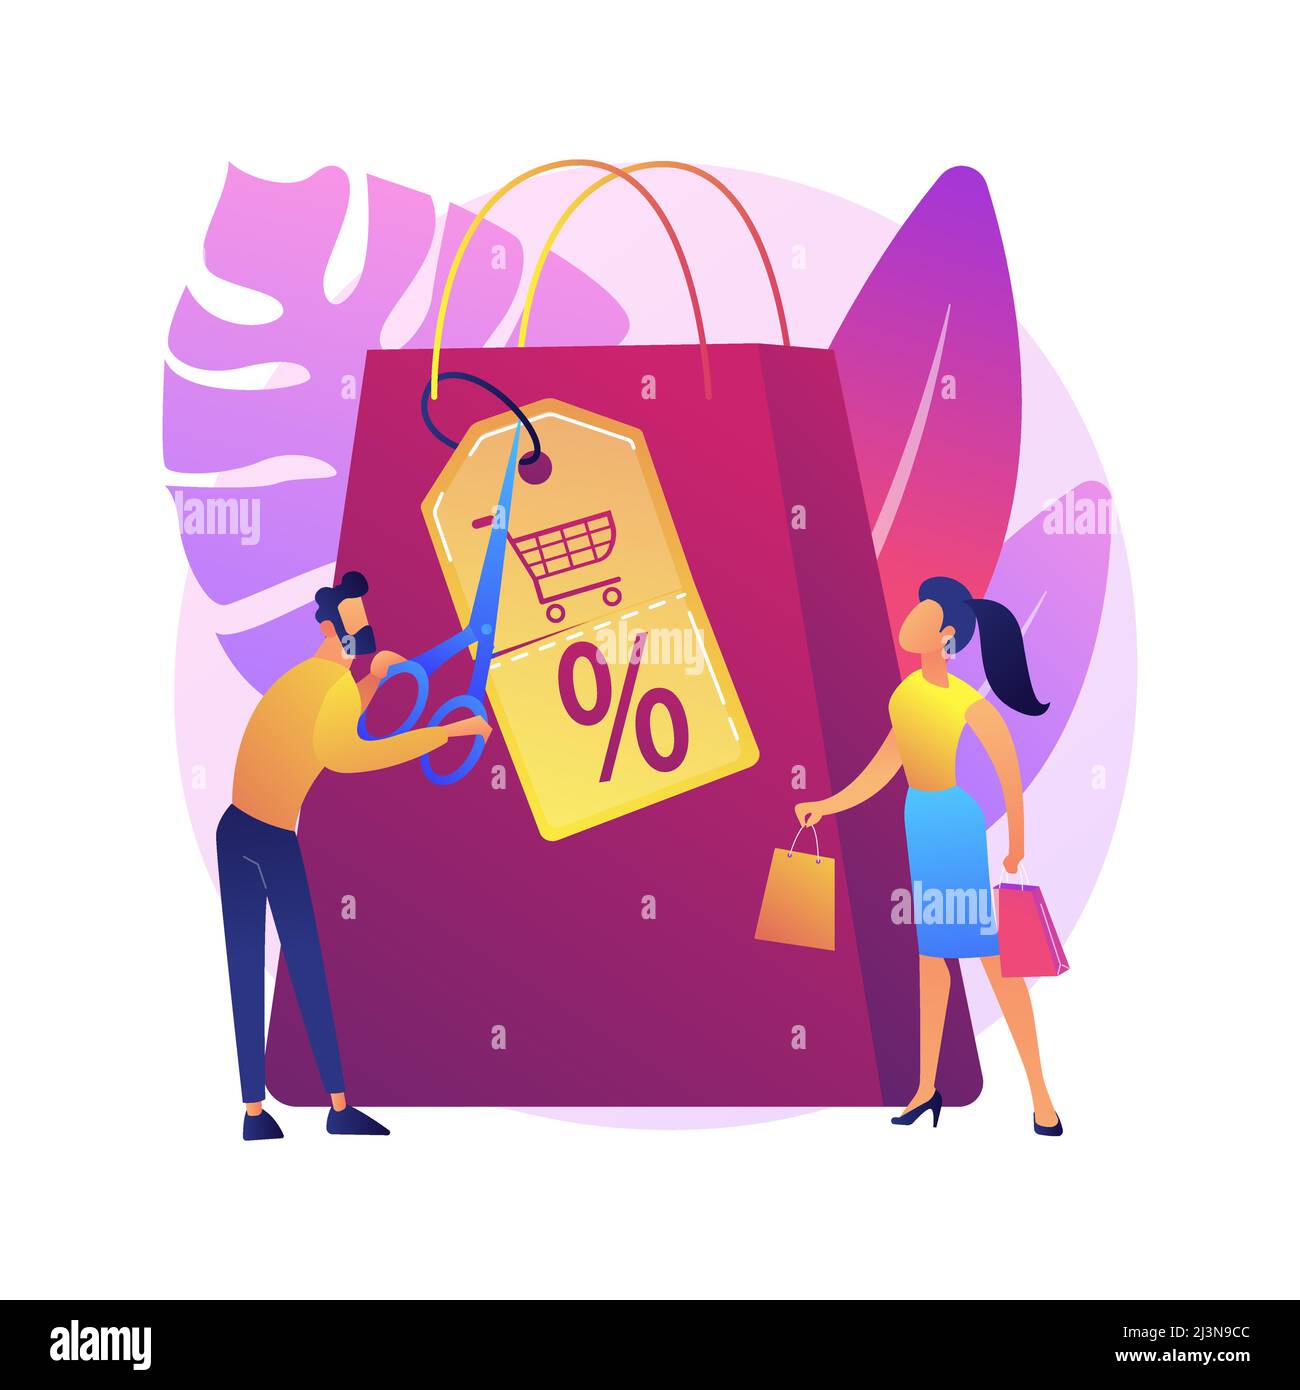 Shopping discounts and allowances cartoon web icon. Selling price reduction, retail sales, creative marketing. Special offer, customer attraction idea Stock Vector